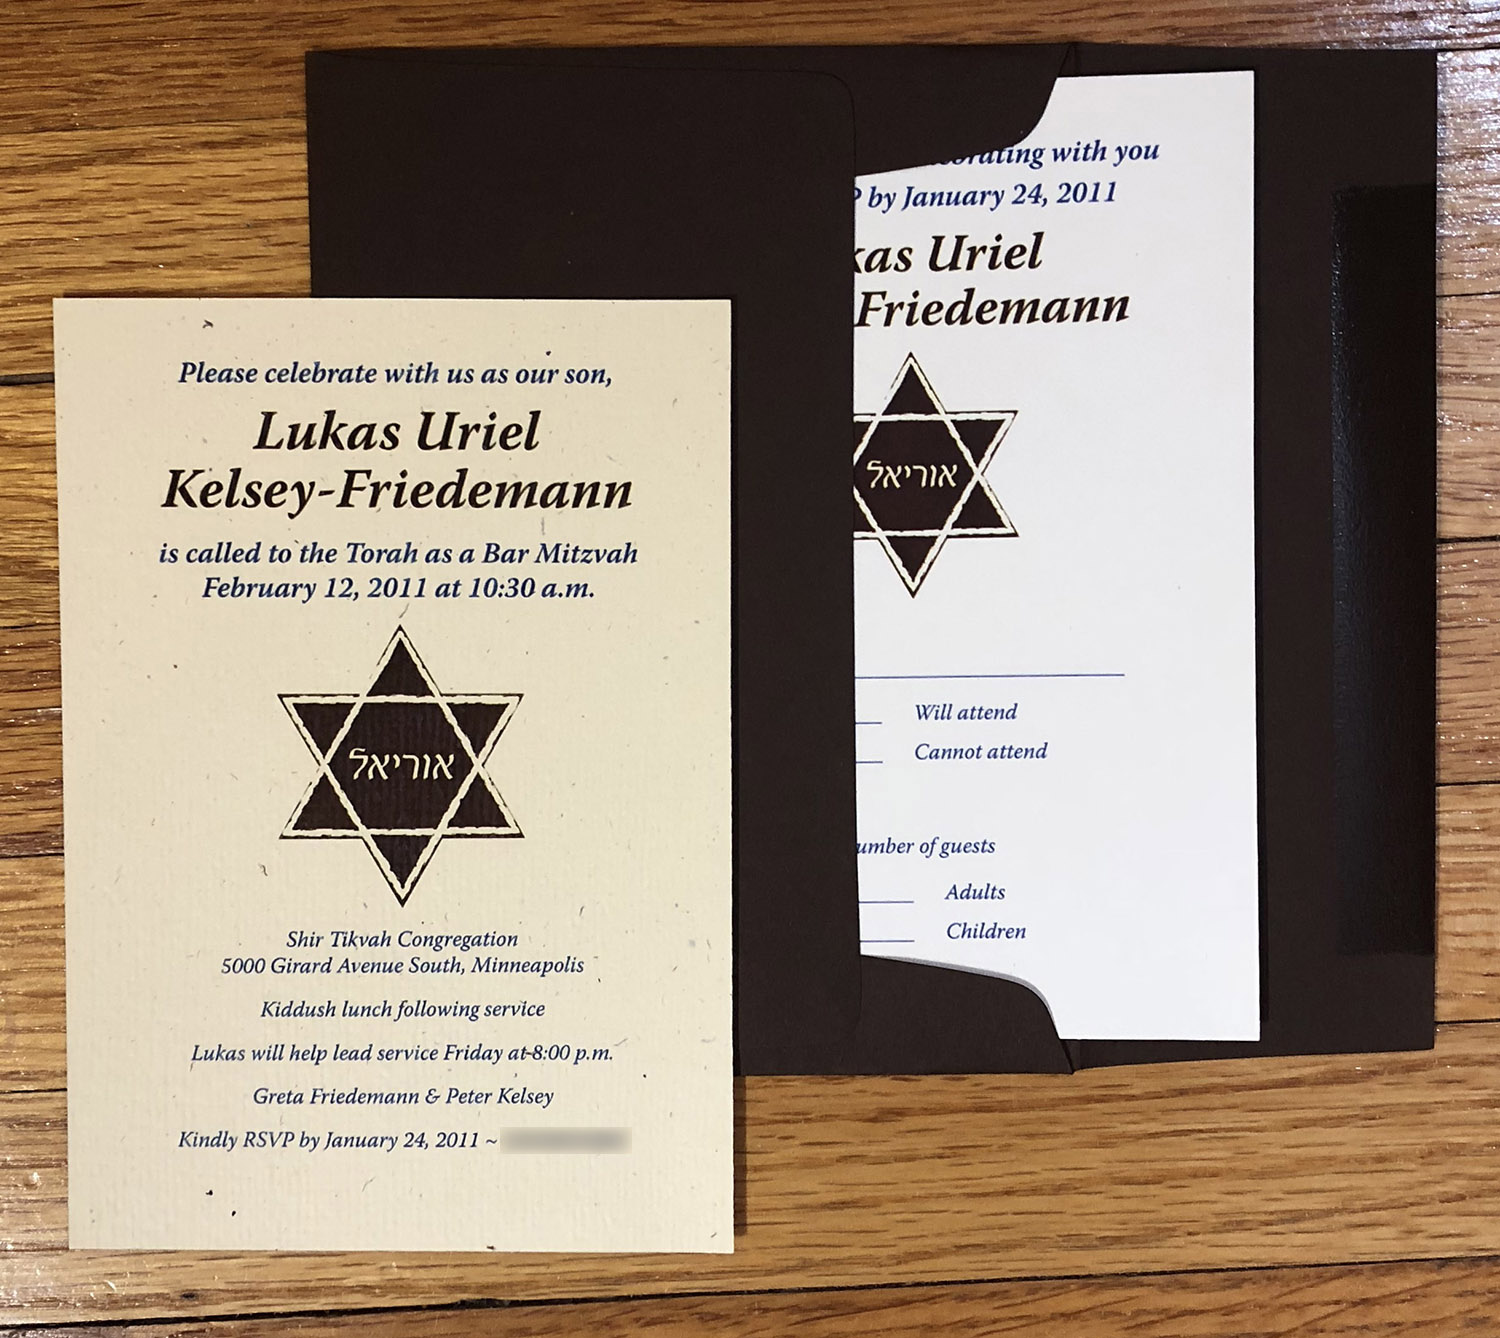 Twin Cities Invitation Design for Bar Mitzvah